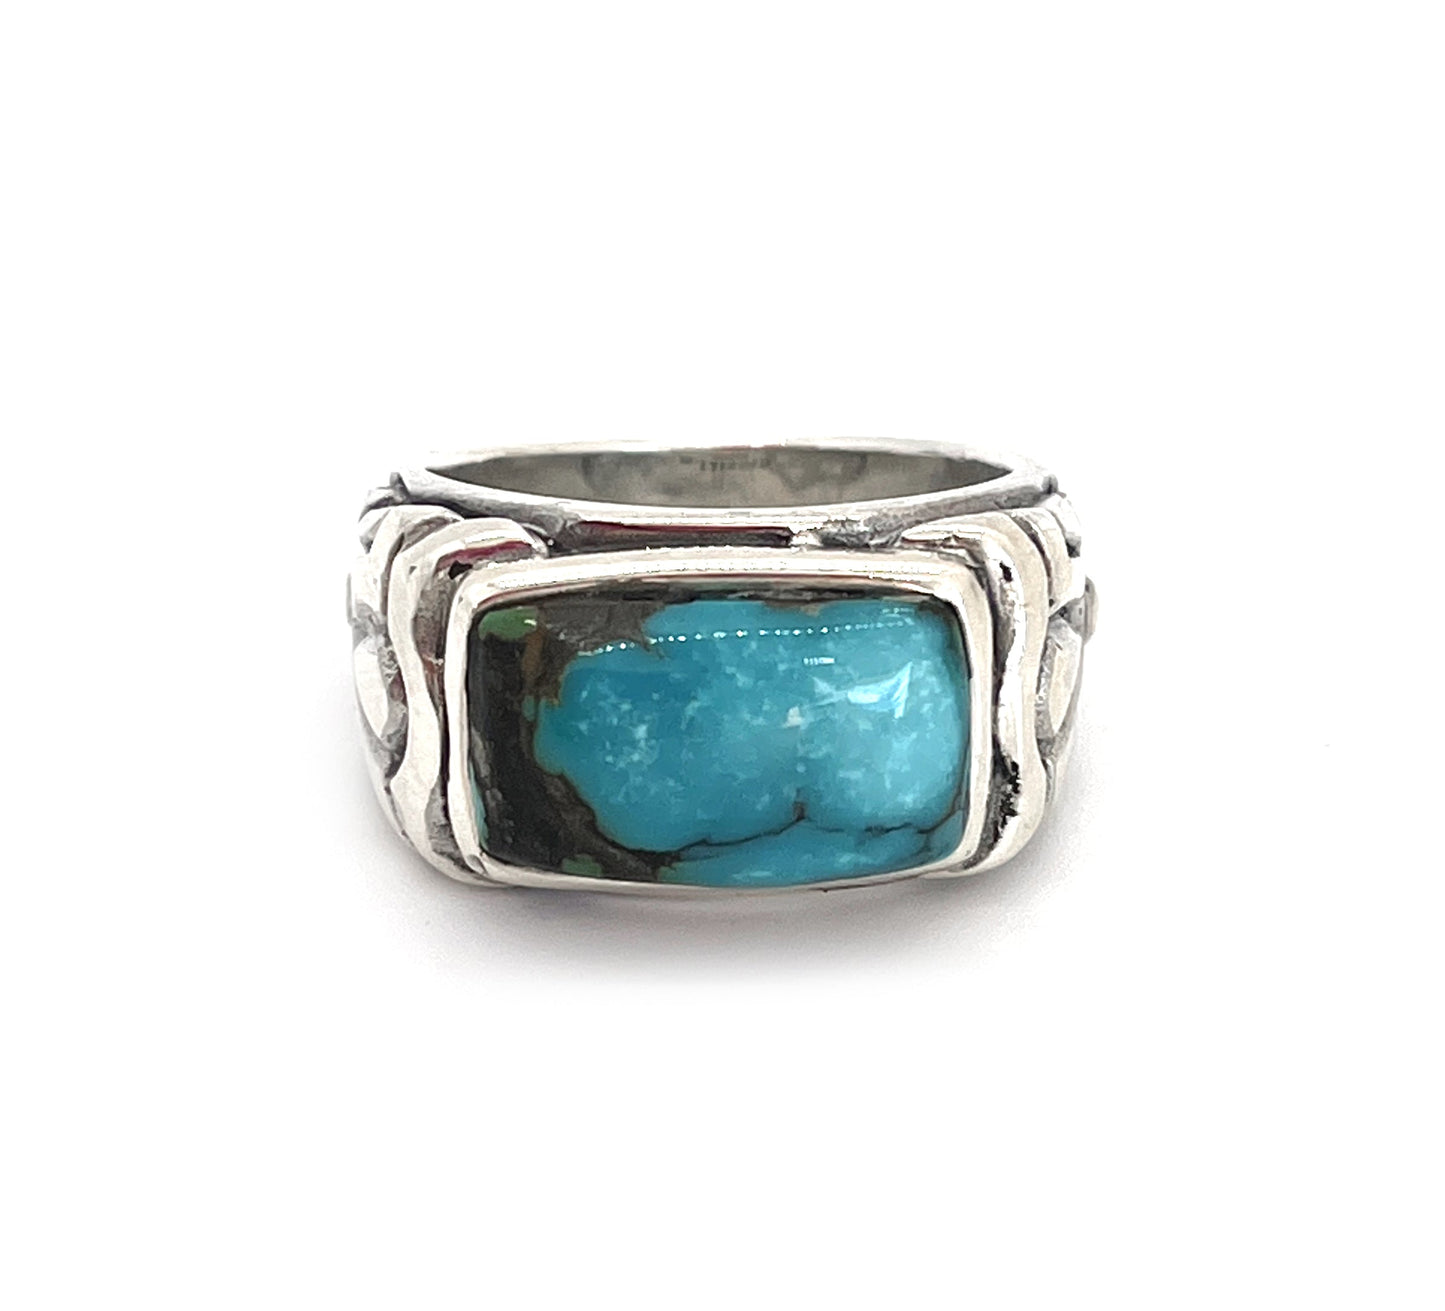 Stabilized Chinese Stone Ring-Jewelry-Shreve Saville-Sorrel Sky Gallery